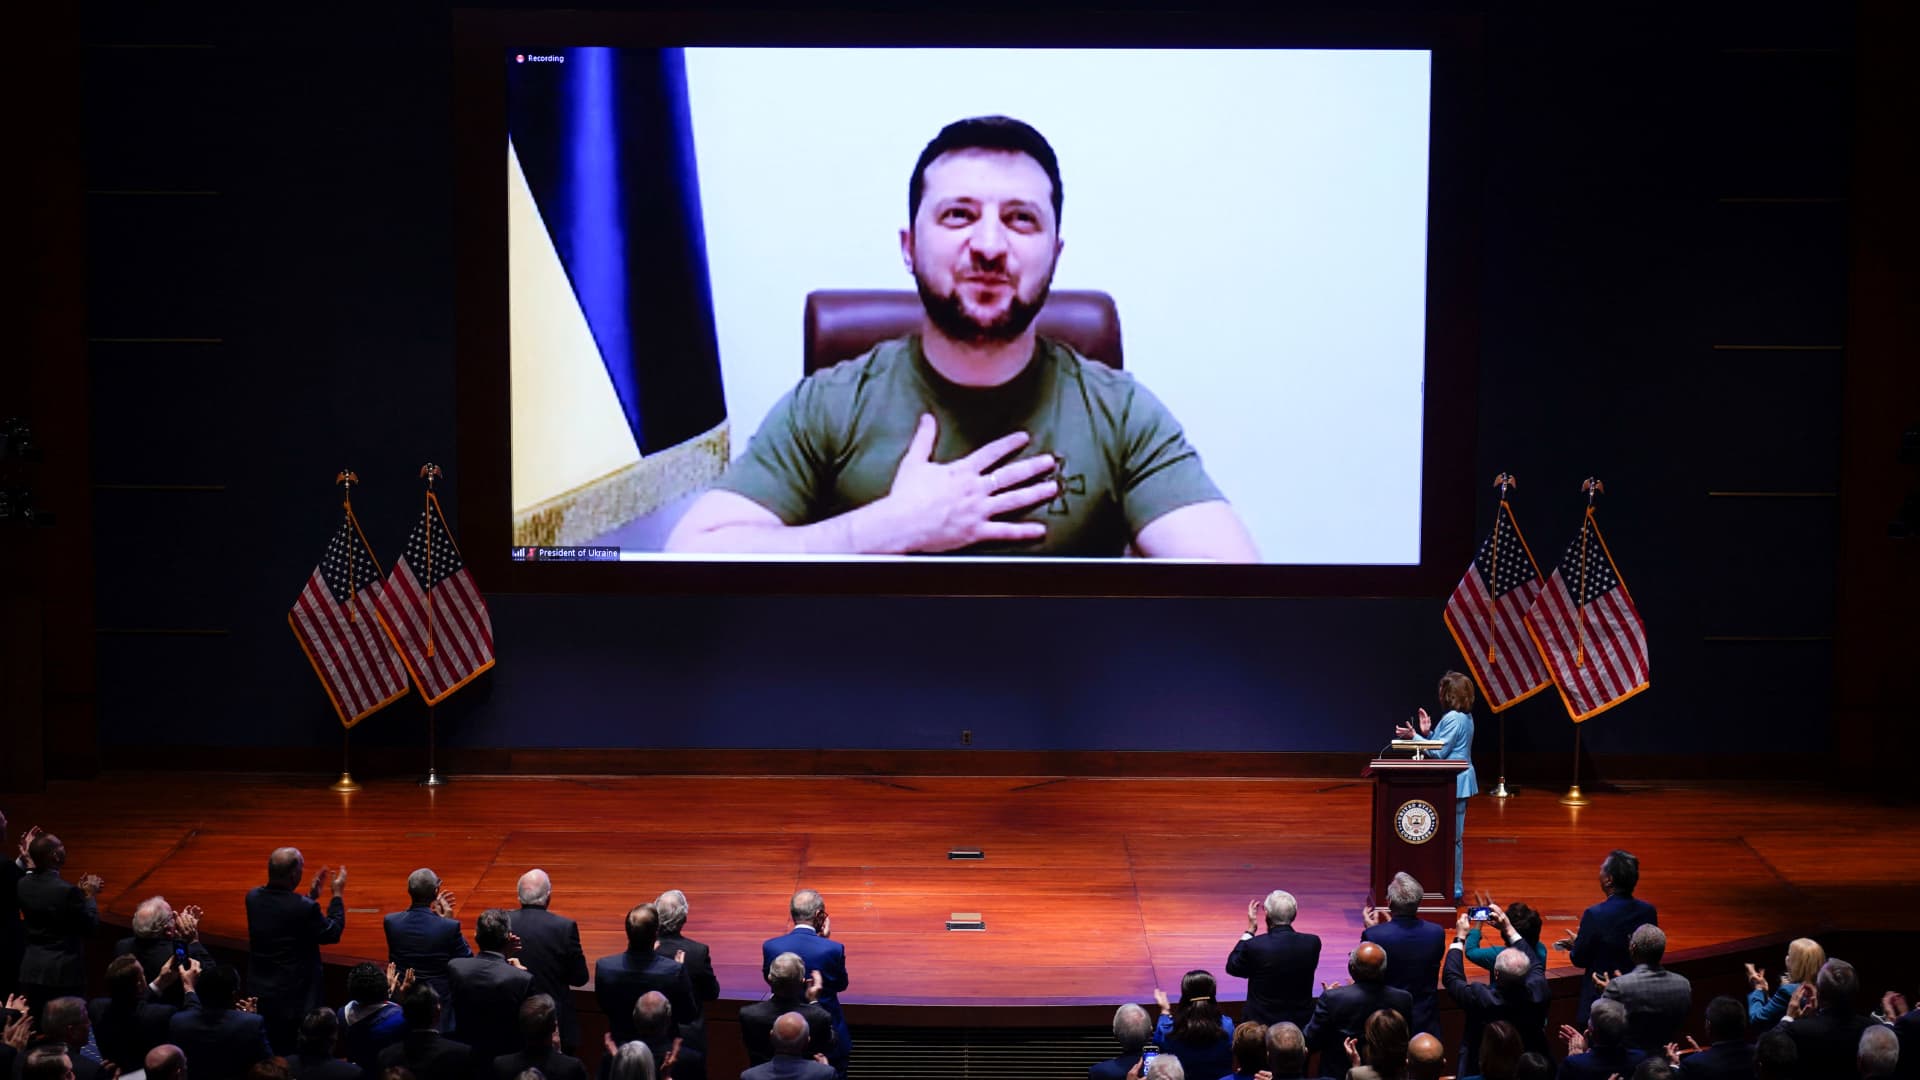 Ukrainian President Volodymyr Zelensky virtually addresses the US Congress on March 16, 2022, at the US Capitol Visitor Center Congressional Auditorium, in Washington, DC.